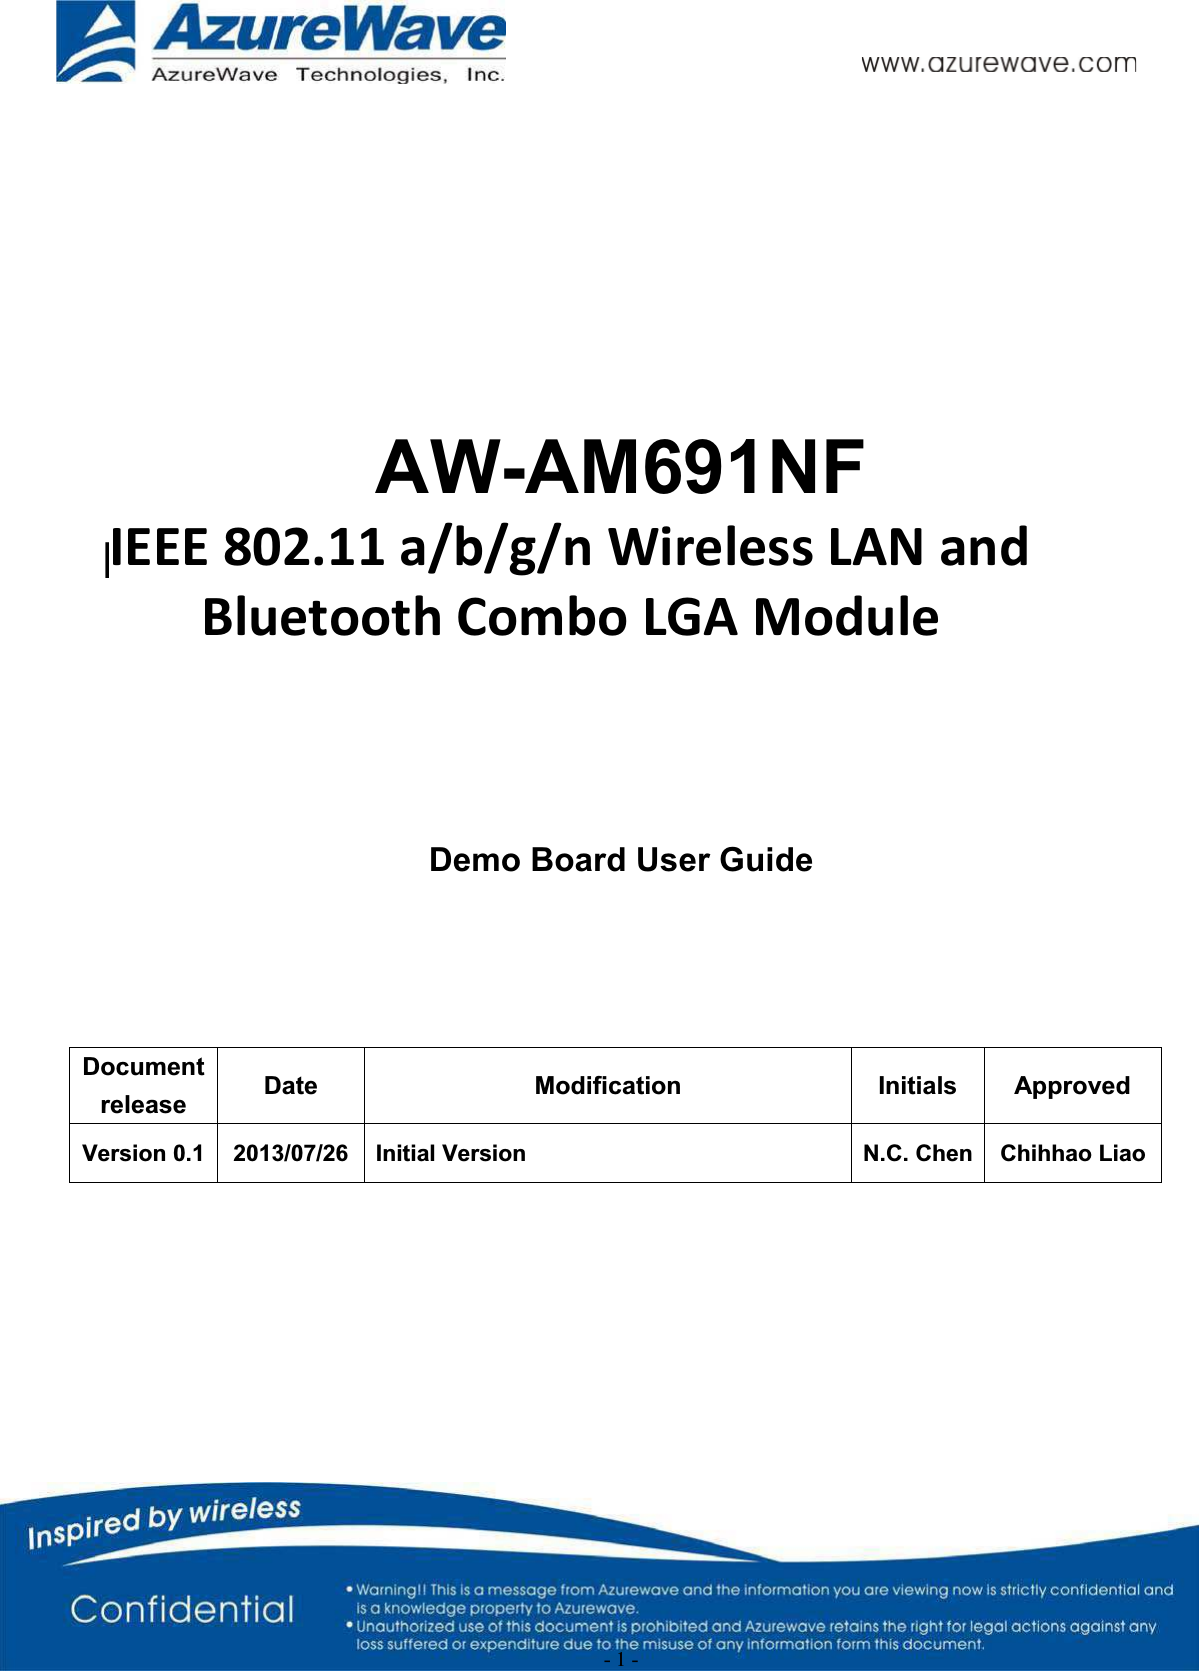 - 1 -AW-AM691NFIEEE 82.11 a/b/g/n Wireless LAN, Bluetooth,FM Combo ModuleDemo Board User GuideDocument release Date Modification Initials ApprovedVersion 0.1 2013/07/26 Initial Version N.C. Chen Chihhao LiaoIEEE 802.11 a/b/g/n Wireless LAN and            Bluetooth Combo LGA Module  